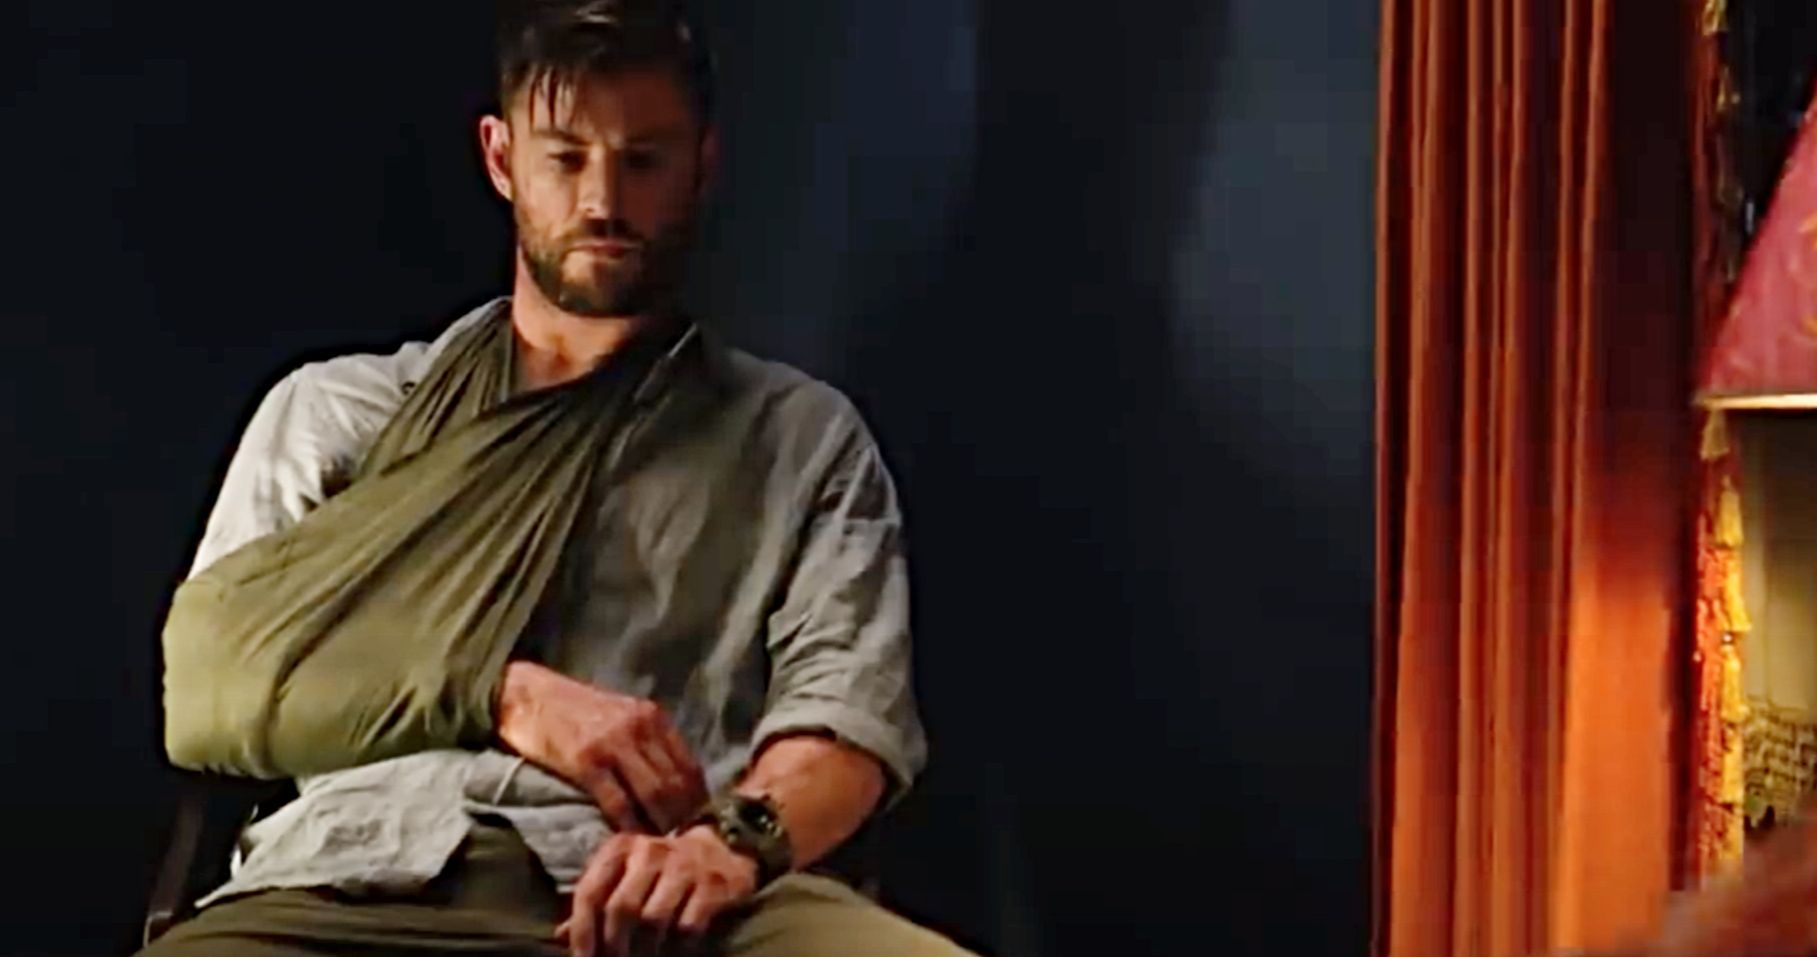 Extraction Gets Chris Hemsworth to Cry on Cue, Here's How He Does It